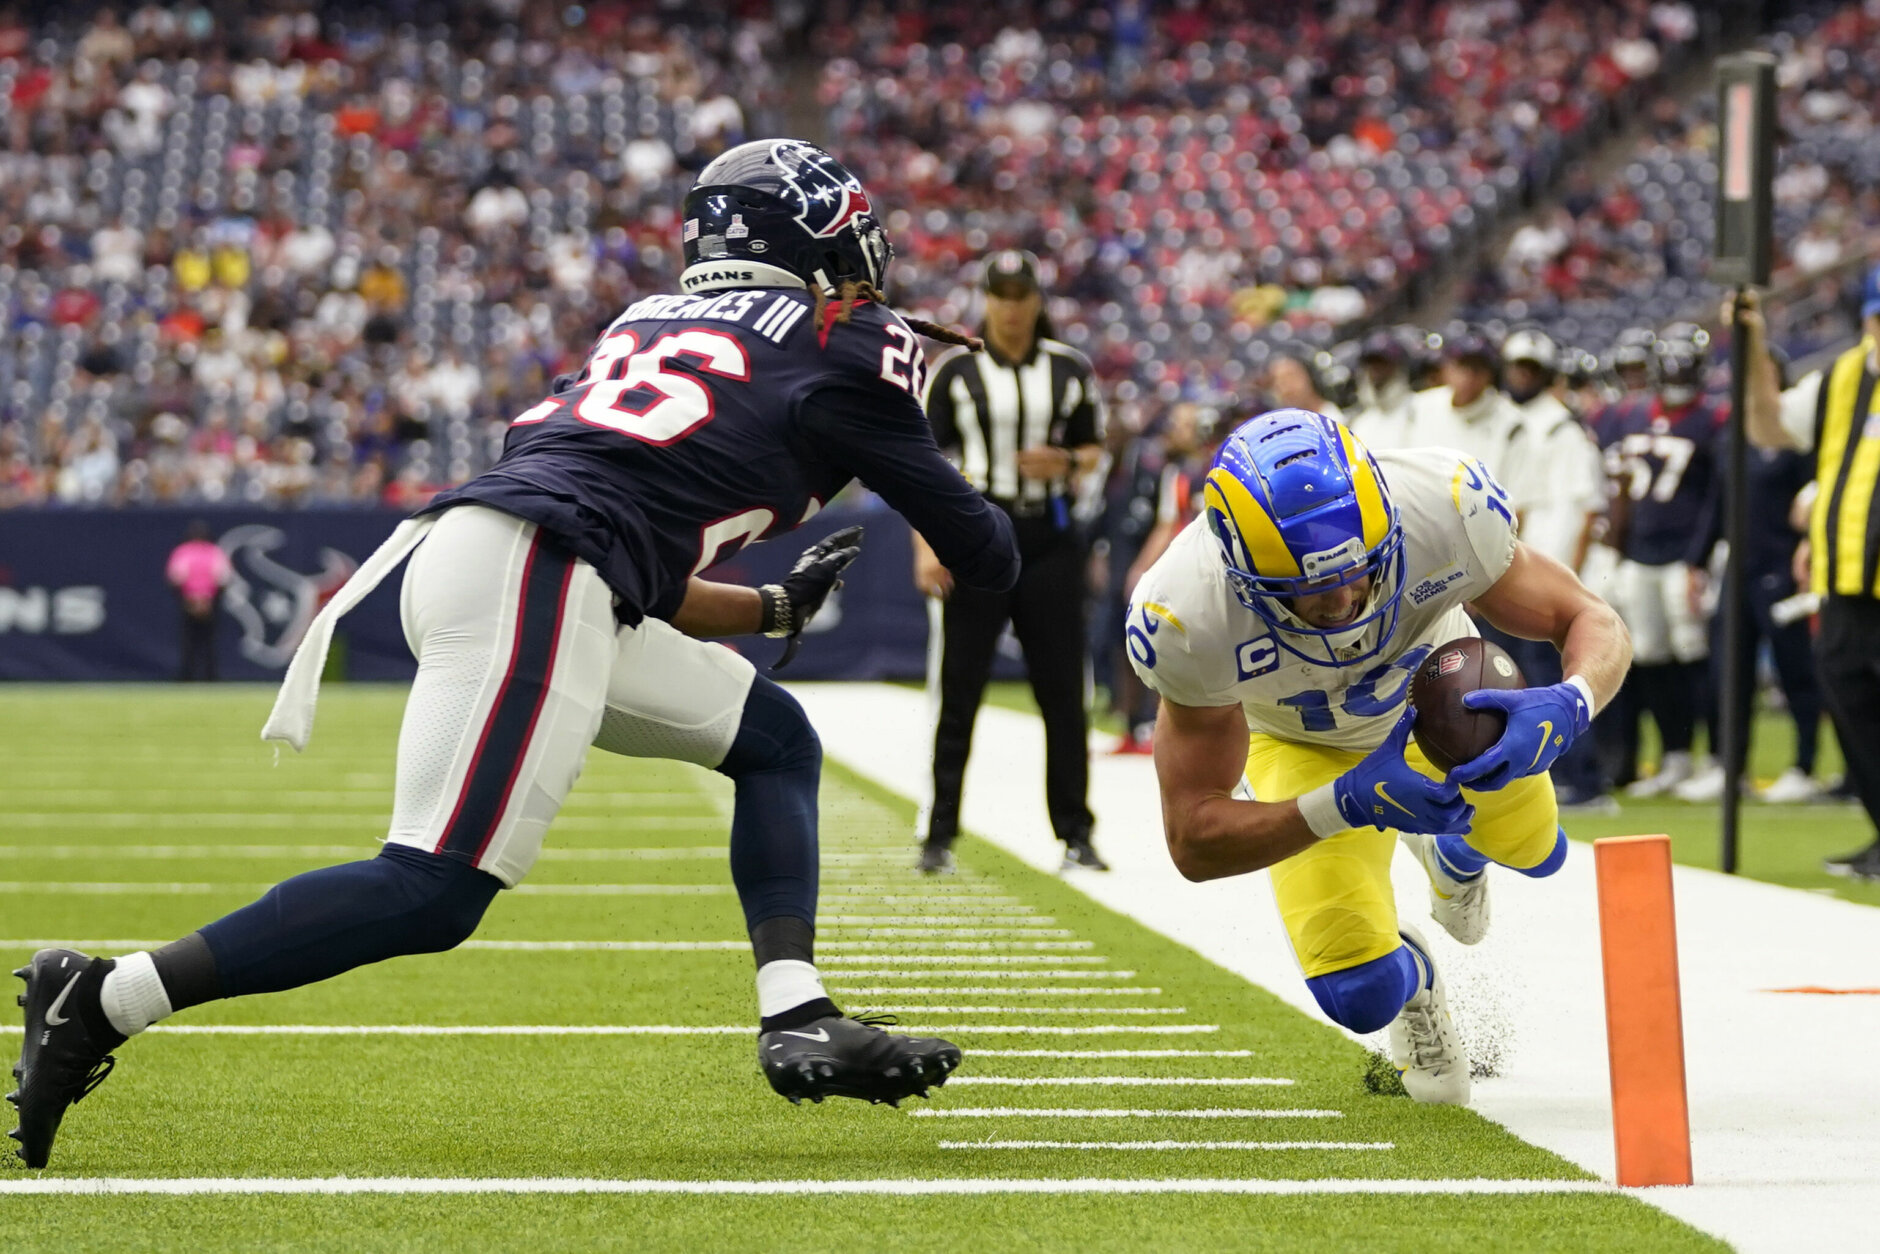 <p><b><i>Rams 38</i></b><br />
<b><i>Texans 22</i></b></p>
<p>David Culley: <a href="https://profootballtalk.nbcsports.com/2021/10/28/david-culley-were-not-going-to-allow-aaron-donald-to-wreck-our-game/" target="_blank" rel="noopener">&#8220;We won&#8217;t let Aaron Donald won&#8217;t wreck our game …&#8221;</a></p>
<p>Matthew Stafford, Cooper Kupp, Darrell Henderson Jr., Leonard Floyd and still Aaron Donald: &#8220;Oh, word?&#8221;</p>
<p><em>*Houston held to 77 yards through the first three quarters.*</em></p>
